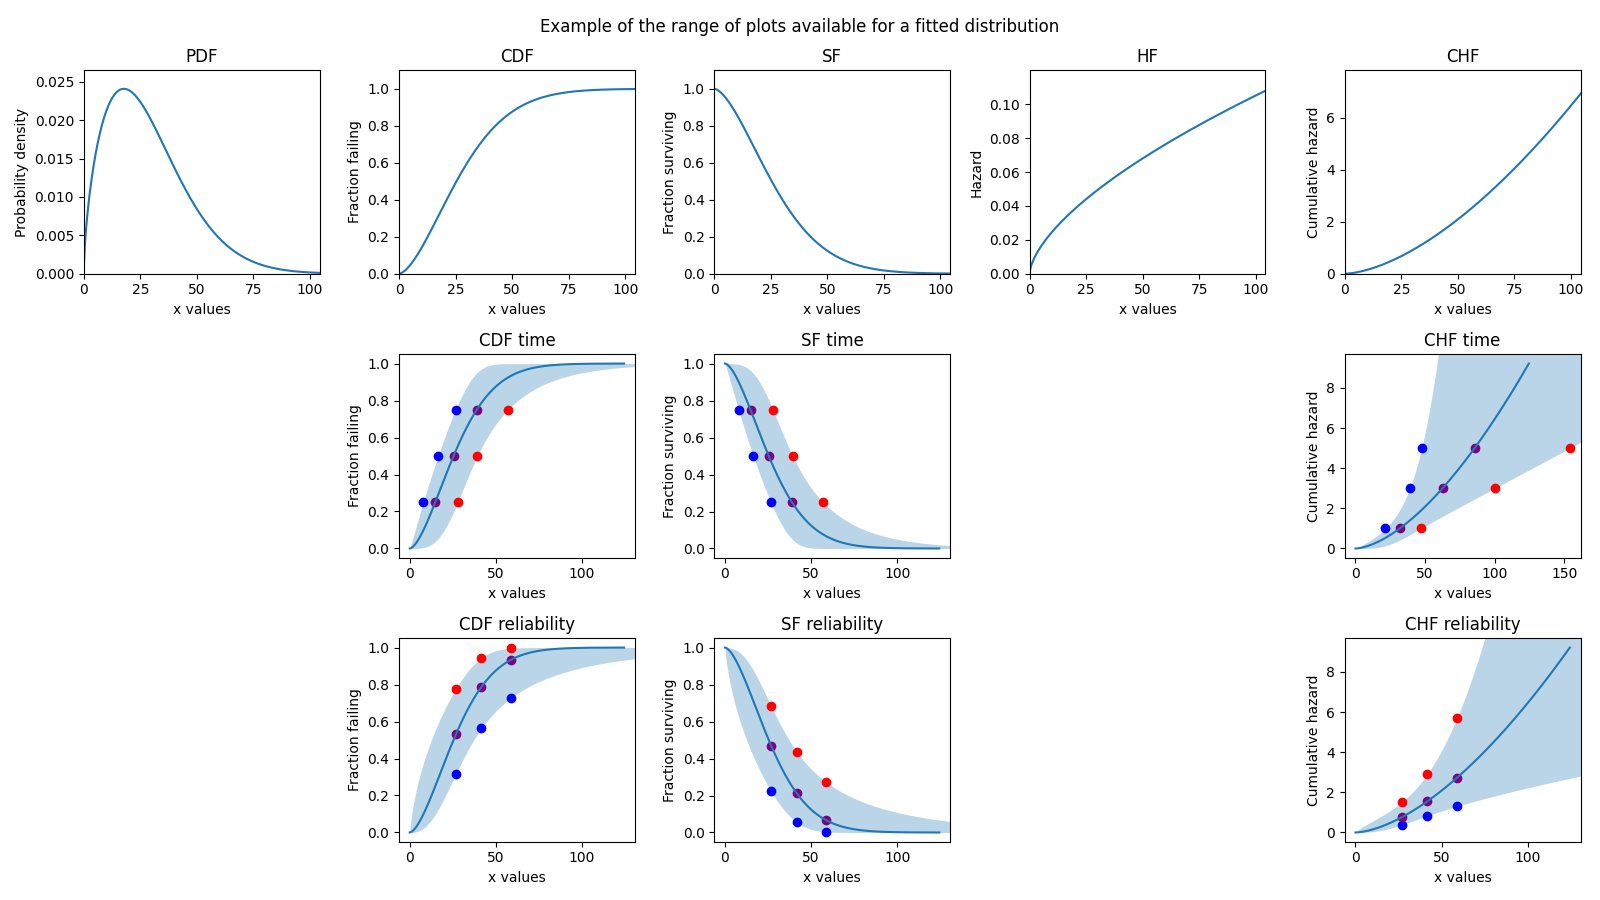 _images/range_of_plots_available.png